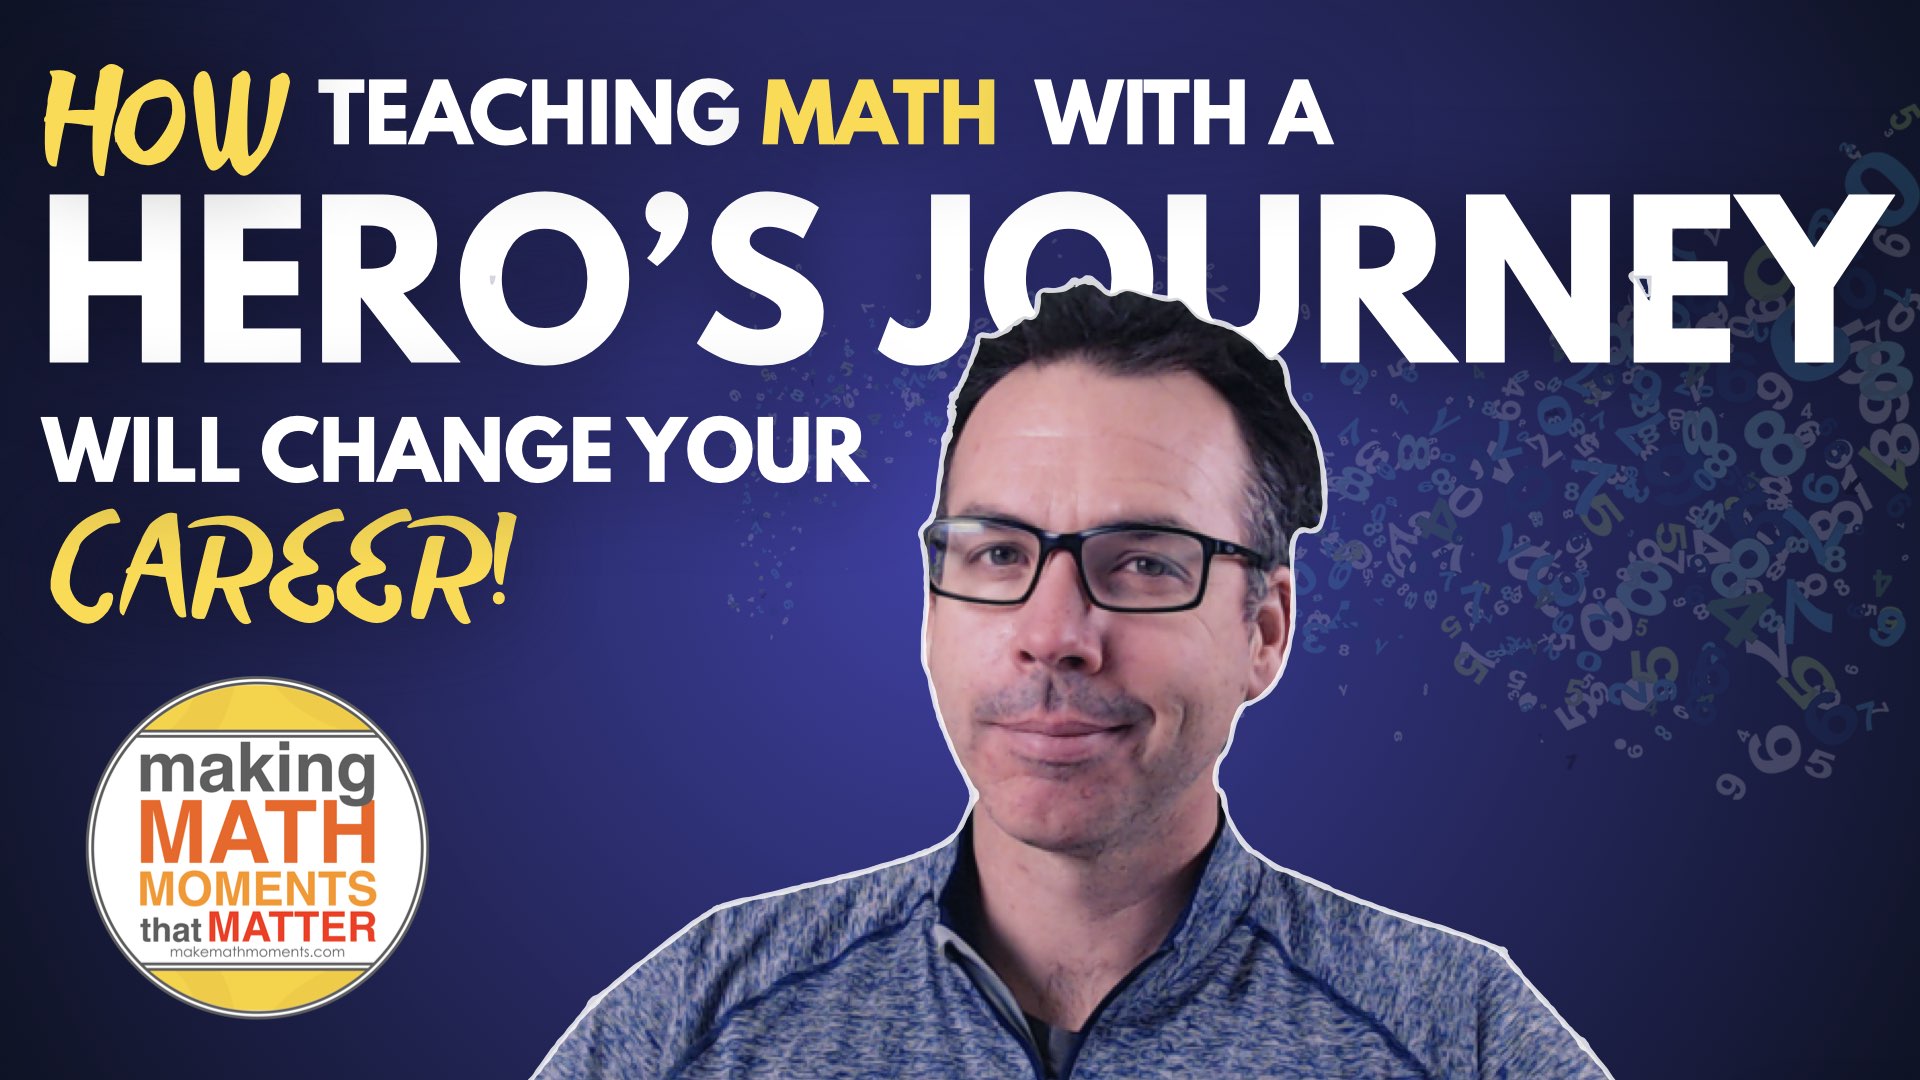 Teaching Math Through a Hero’s Journey Will Change Your Career